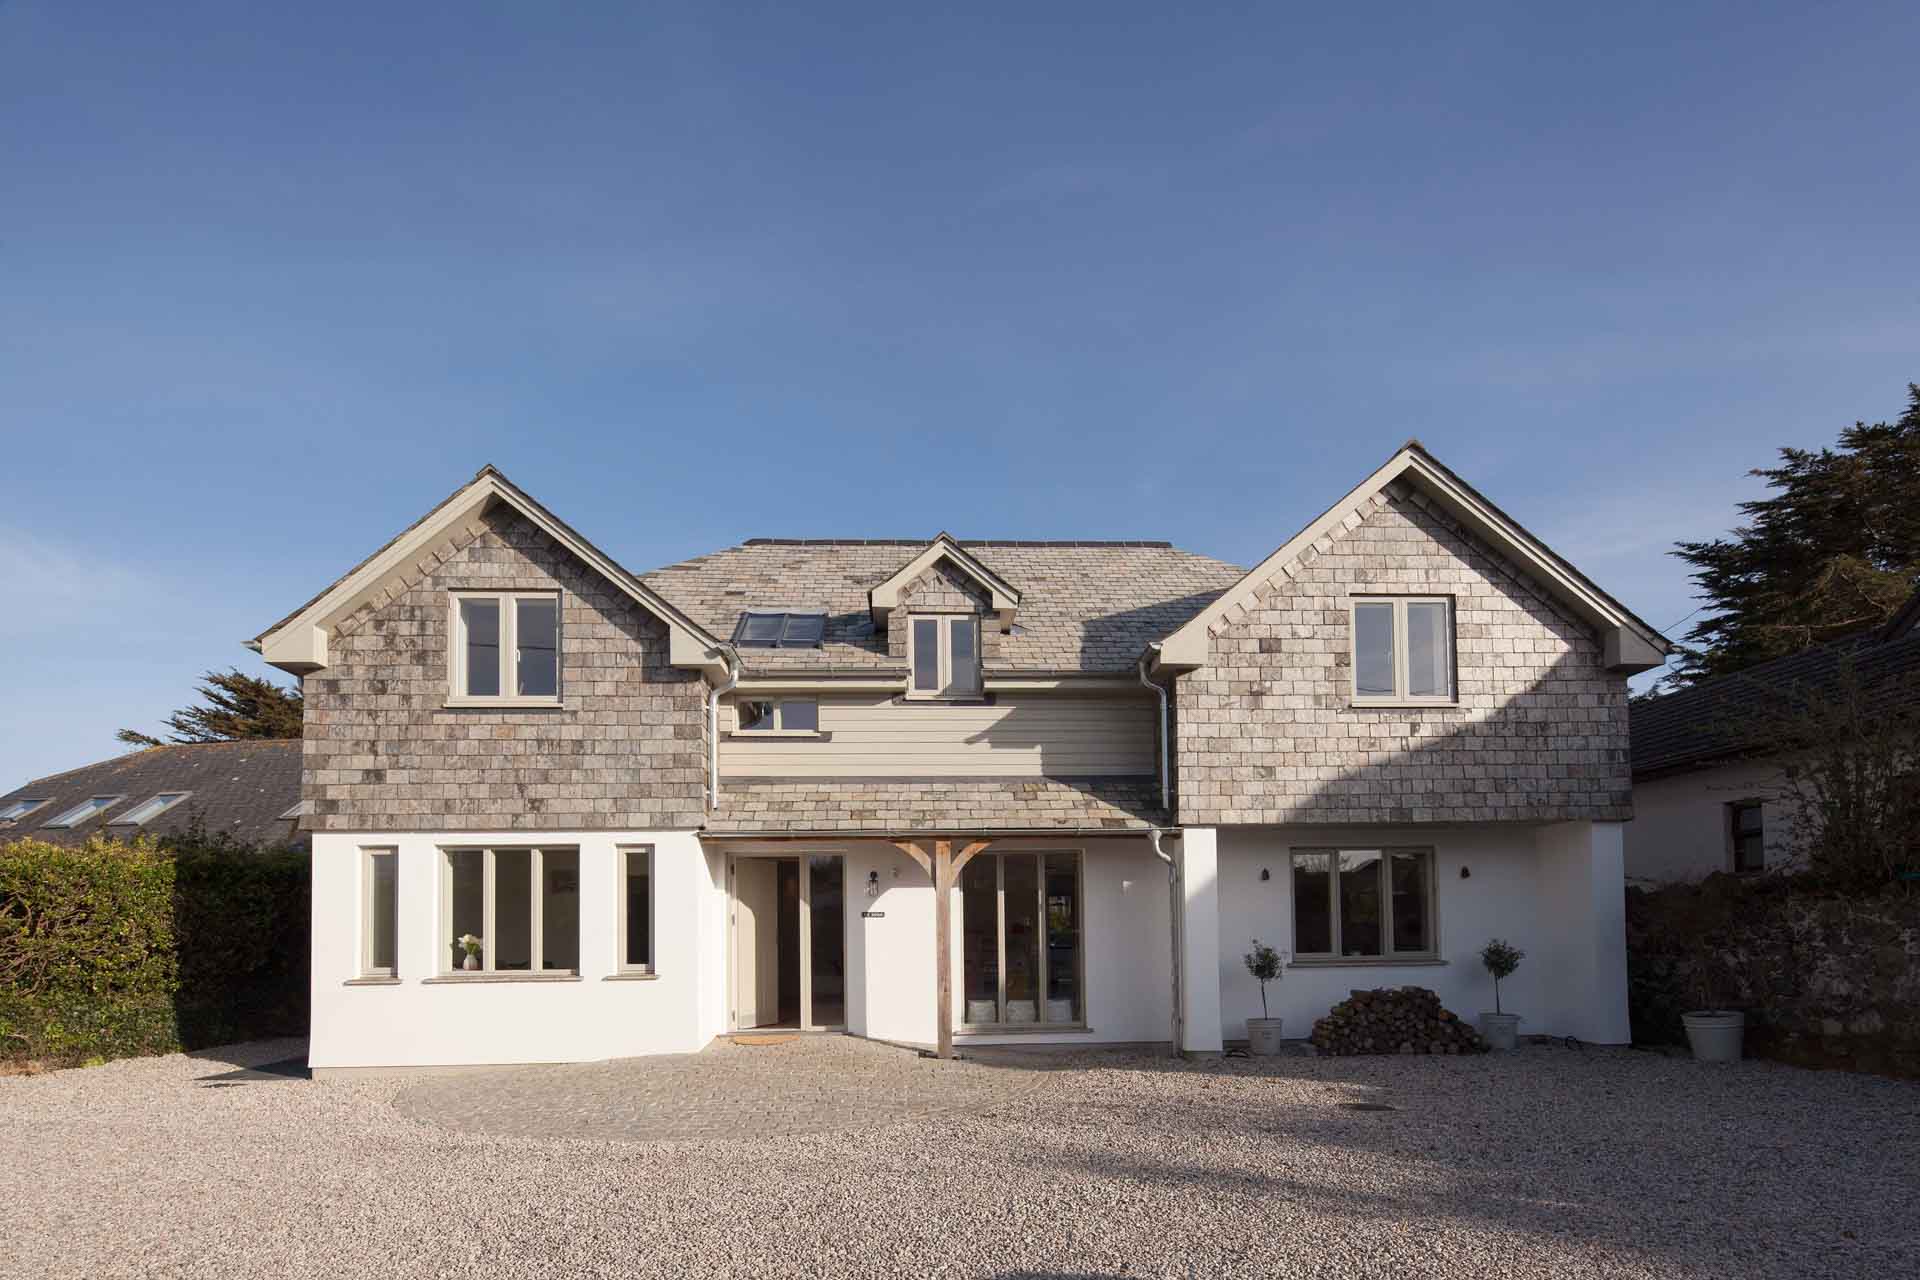 The Bisque Rock Cornwall interiors and exteriors for Architect Jon Hughes